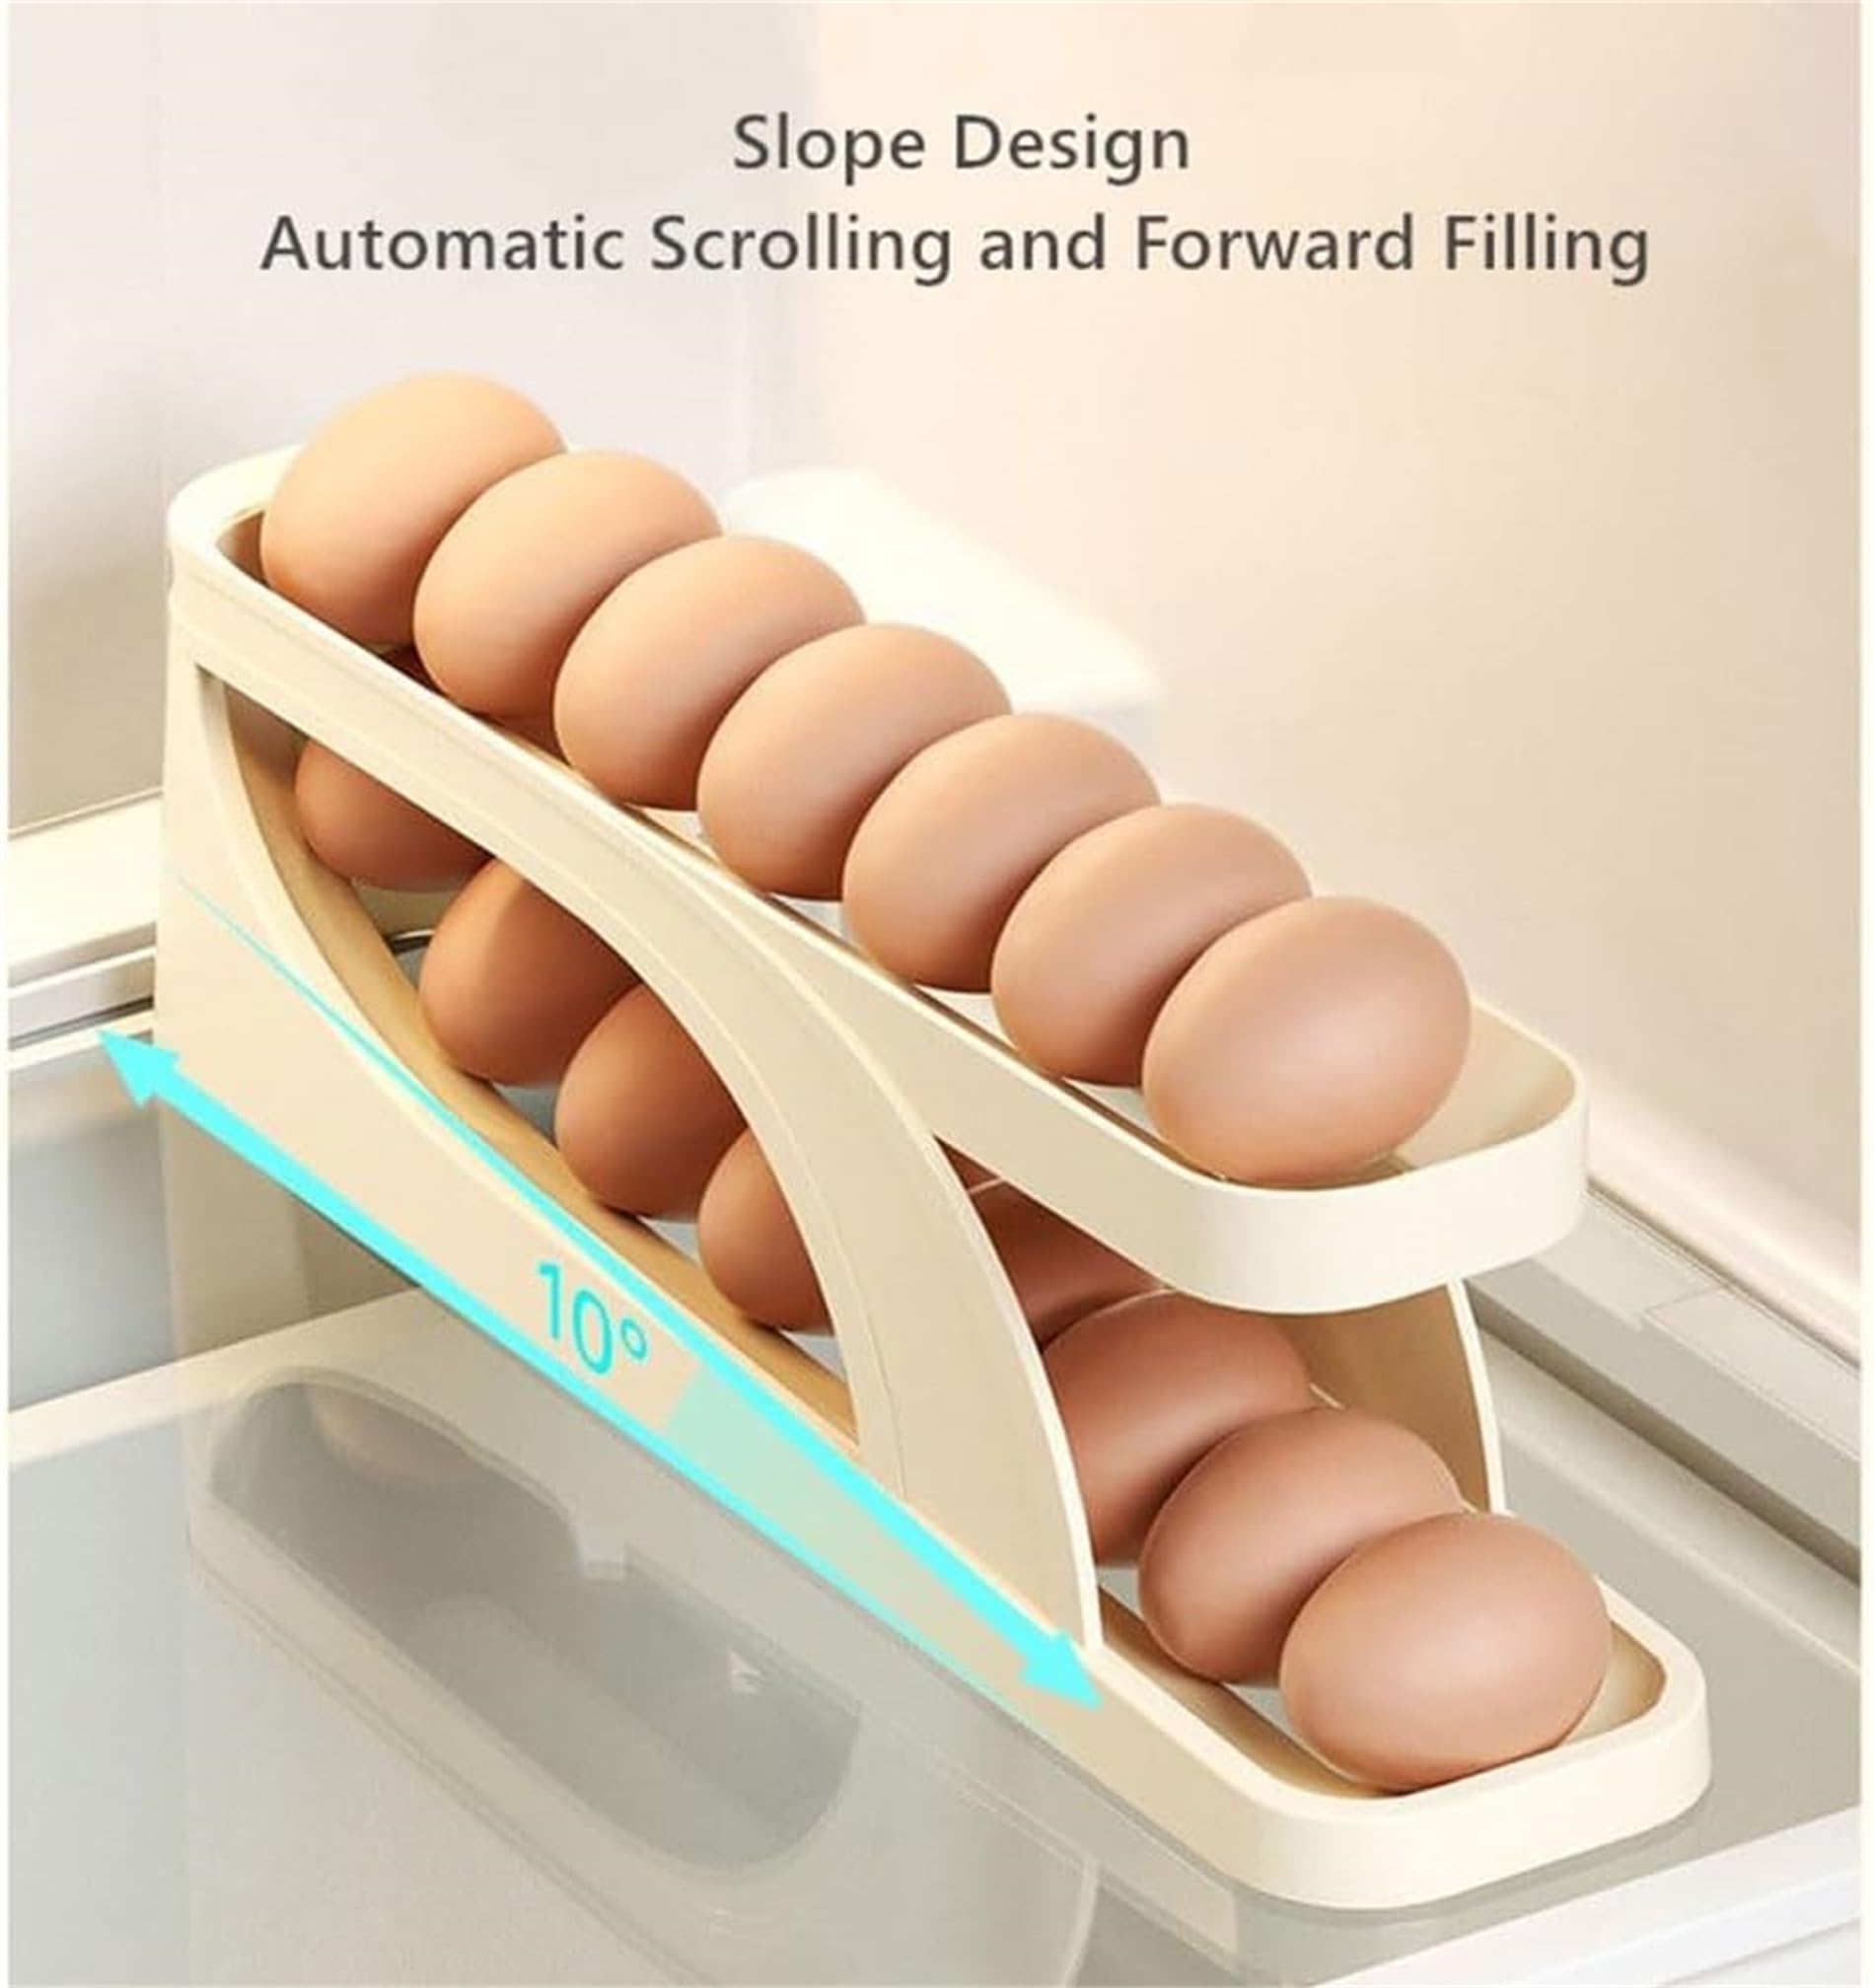 2023 New Automatic Roll-Down Double-layer Egg Dispenser, Automatic Scrolling Egg Rack Holder Storage Box Container for Refrigerator Kichen Cabinet (1Pcs)